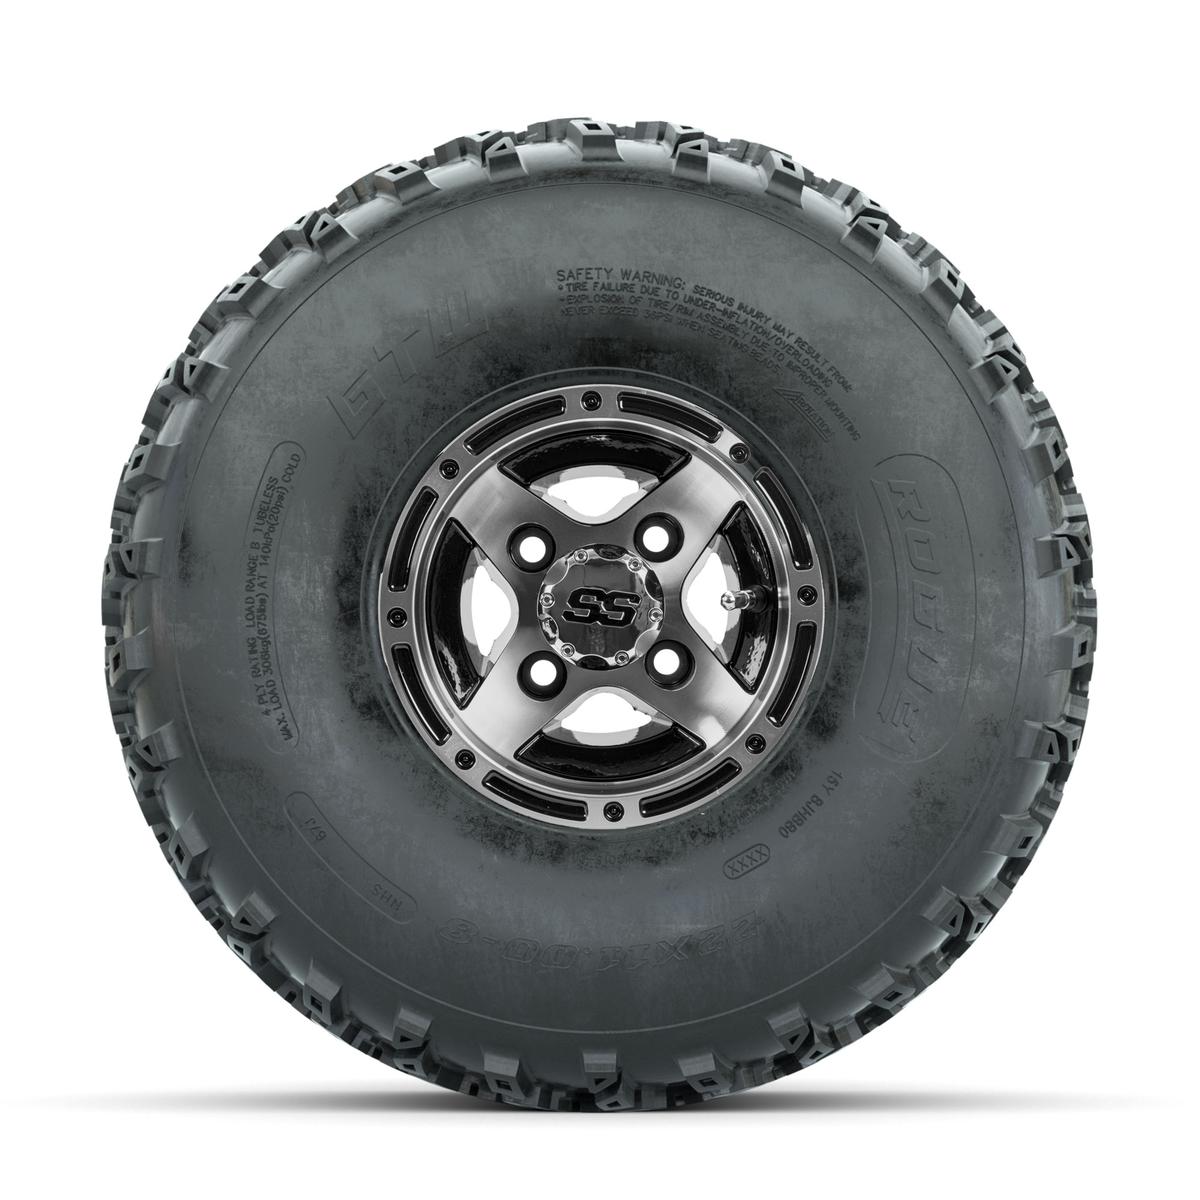 GTW Ranger Machined/Black 8 in Wheels with 22x11.00-8 Rogue All Terrain Tires – Full Set